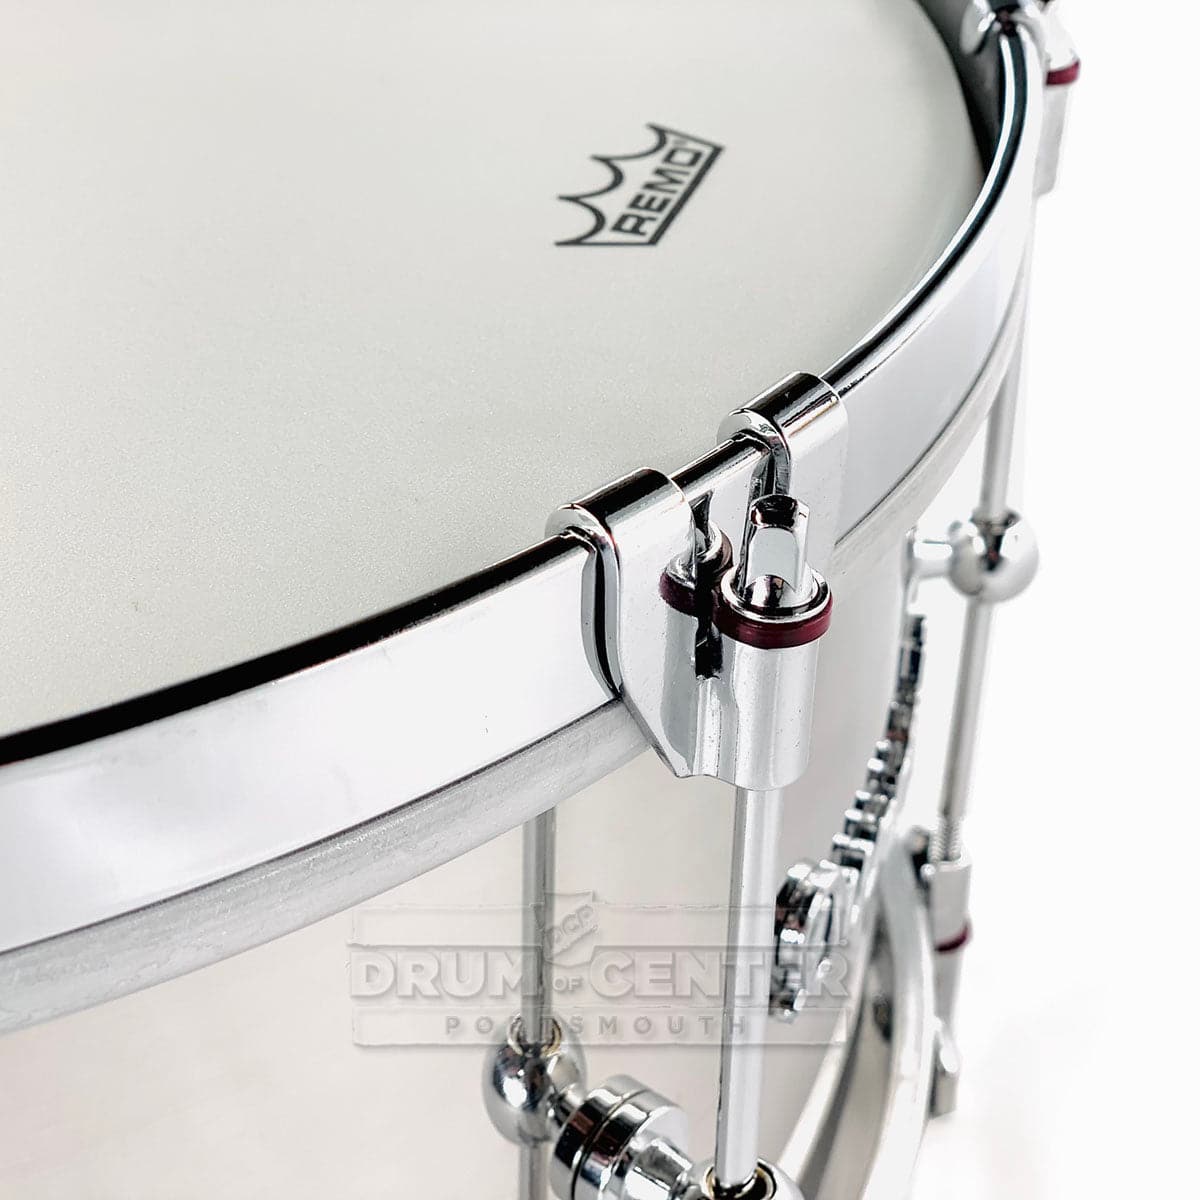 Dunnett Classic Stainless Steel Single Tension Snare Drum 14x6.5 w/Cold Rolled Hoops